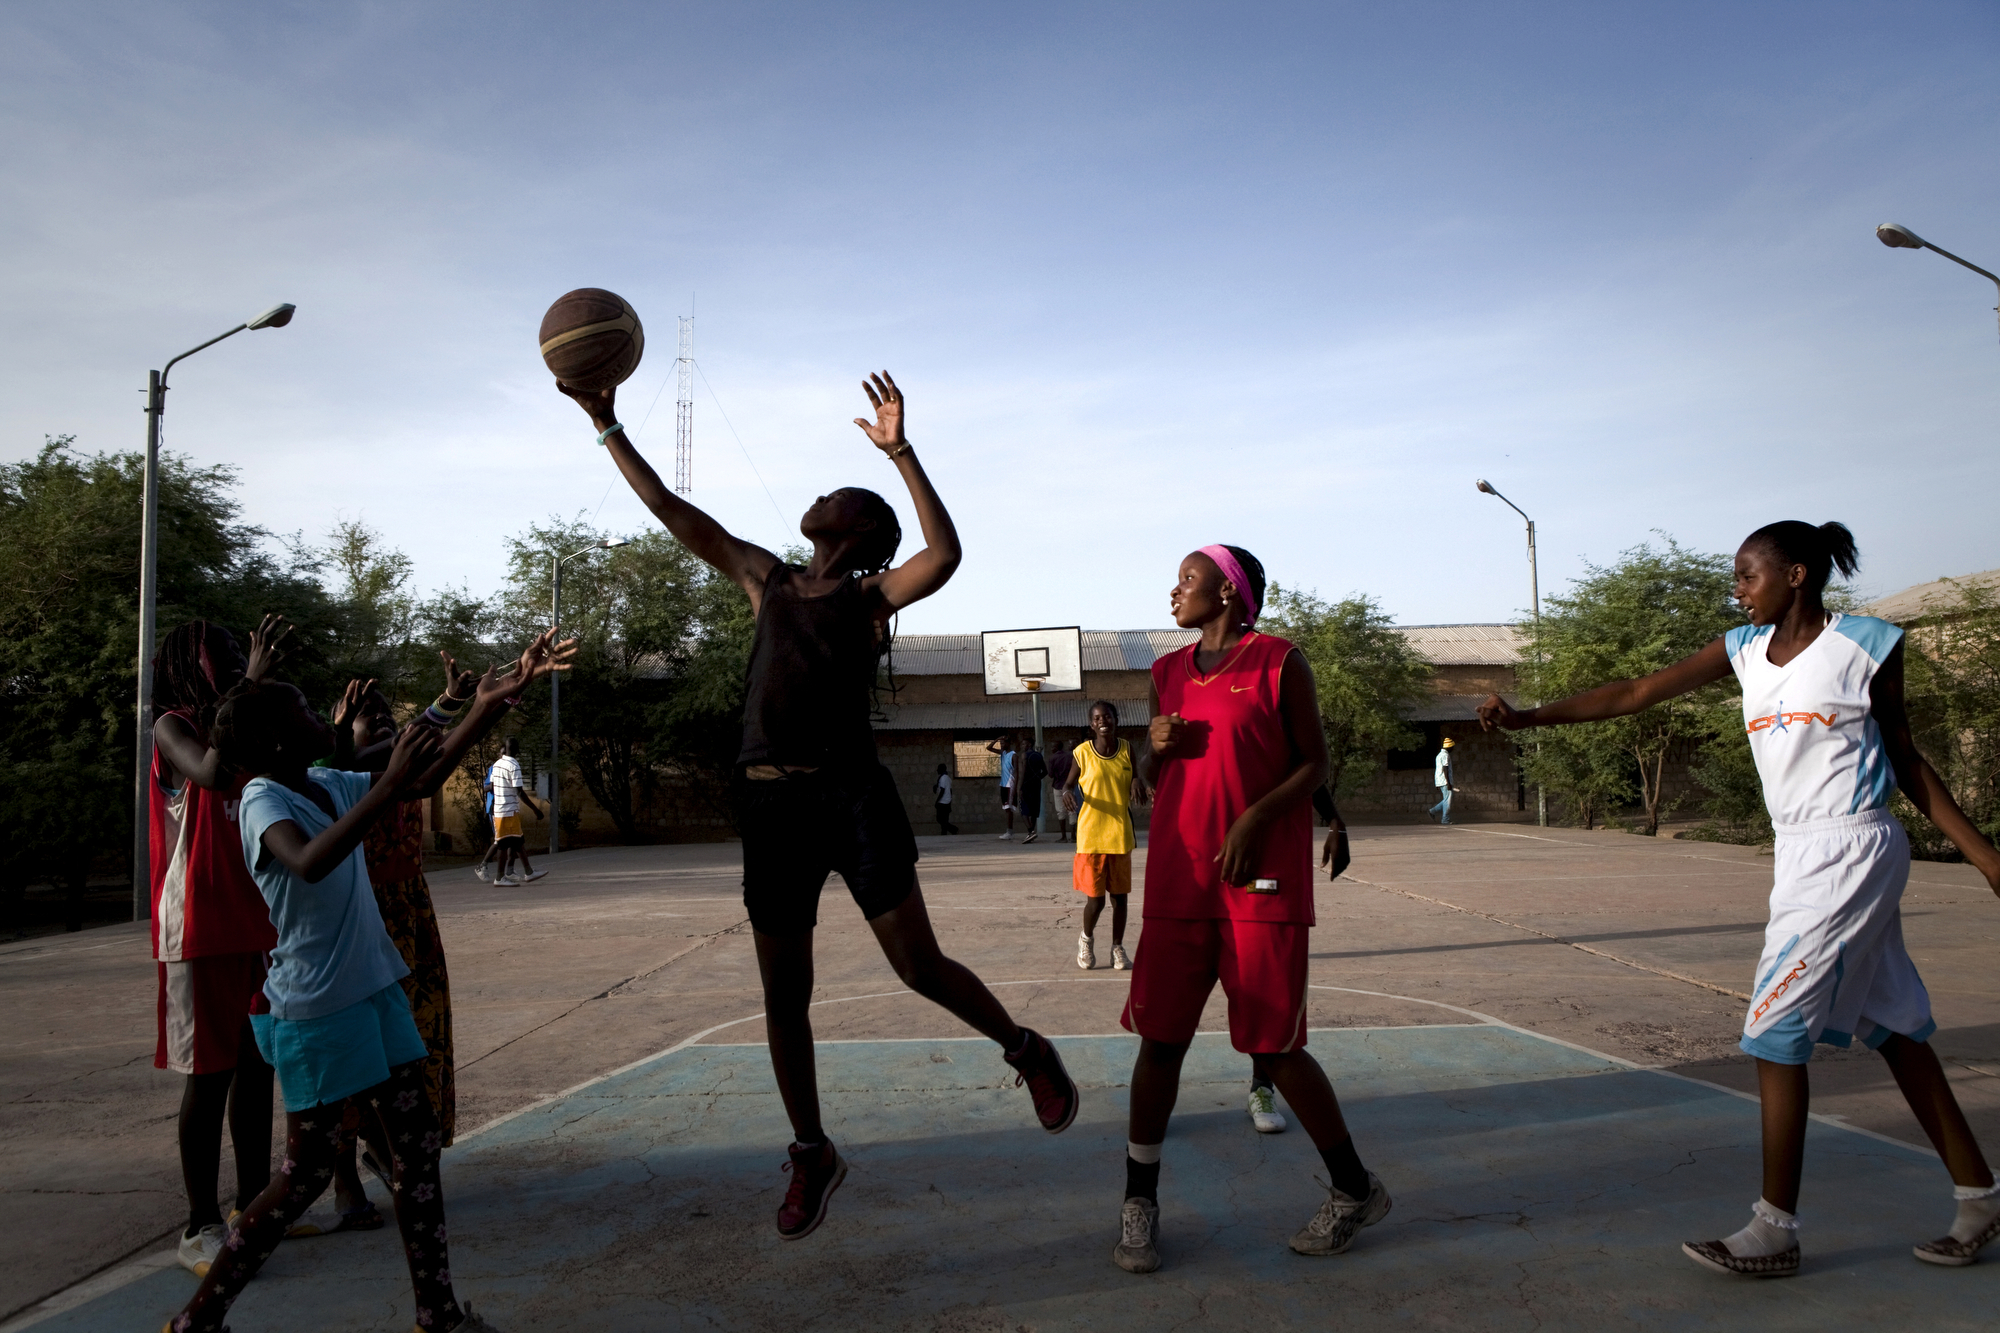  TIMBUKTU, Mali. OCTOBER 2013. Girls play basketball in downtown Timbuktu, Mali, as part of the Academie de Basket coached by El Hadj Adjanga, a 54-year-old local butcher.  "I can tell you this..the first week after liberation -- as soon as they coul